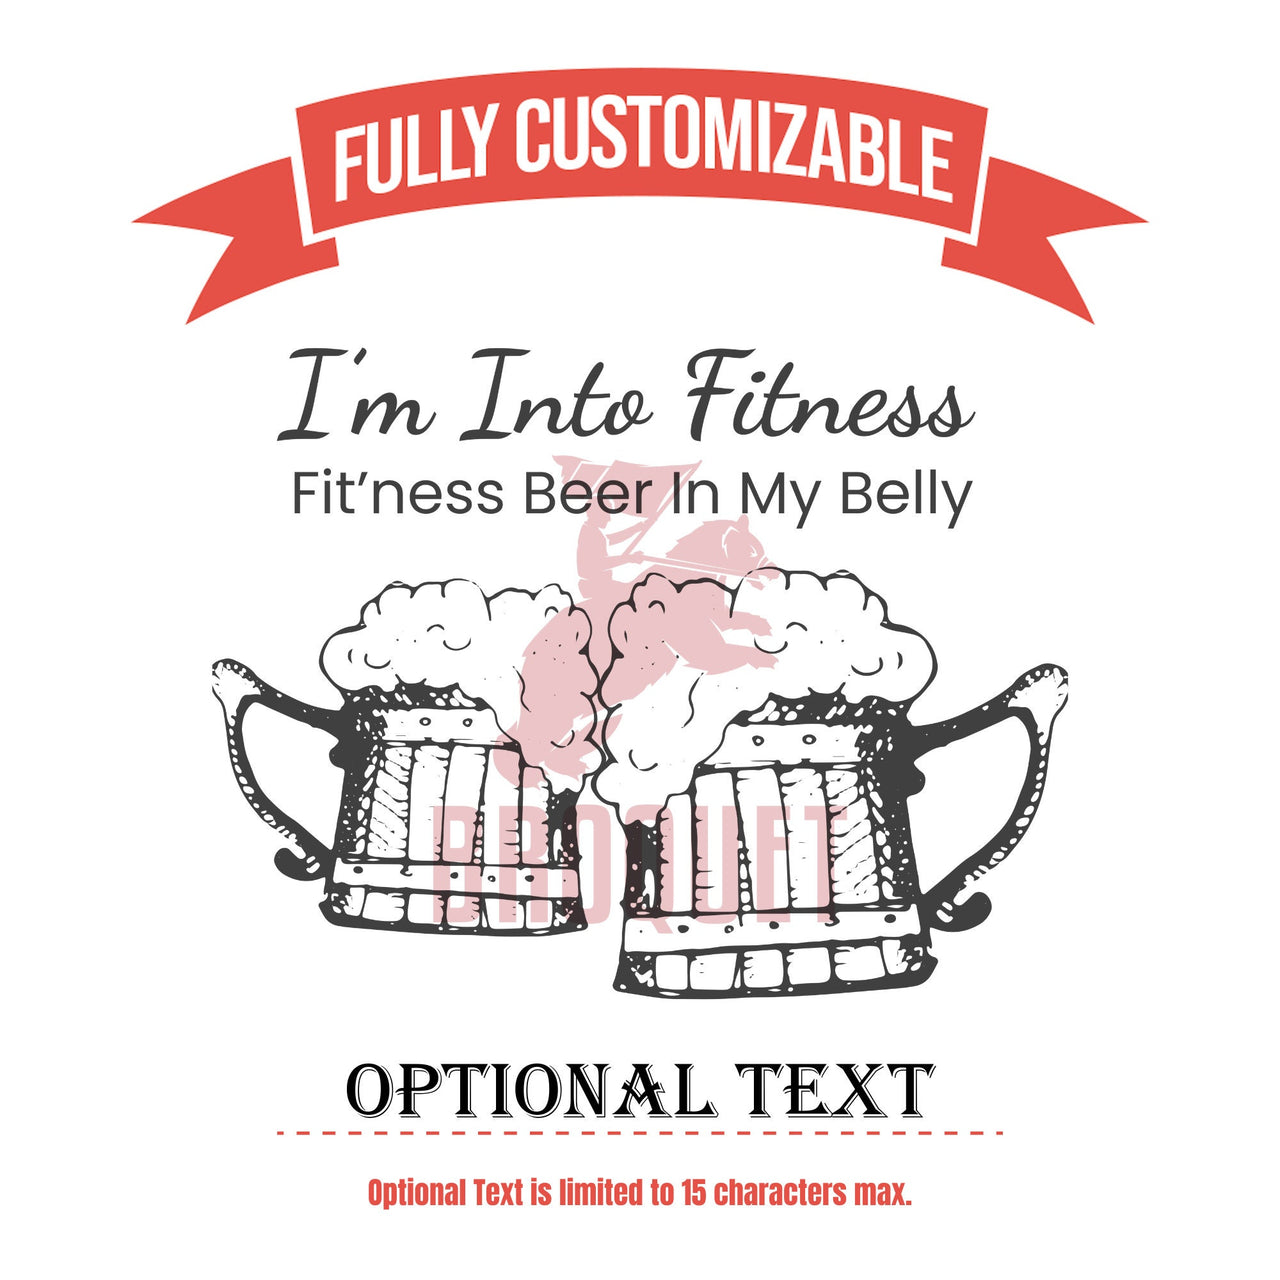 I'm Into Fitness - Fit'ness Beer In My Belly Tumbler, Personalized Cups Tankard Beer Mug, Custom Tumbler Gift for Beer Lover, Drinking Gifts